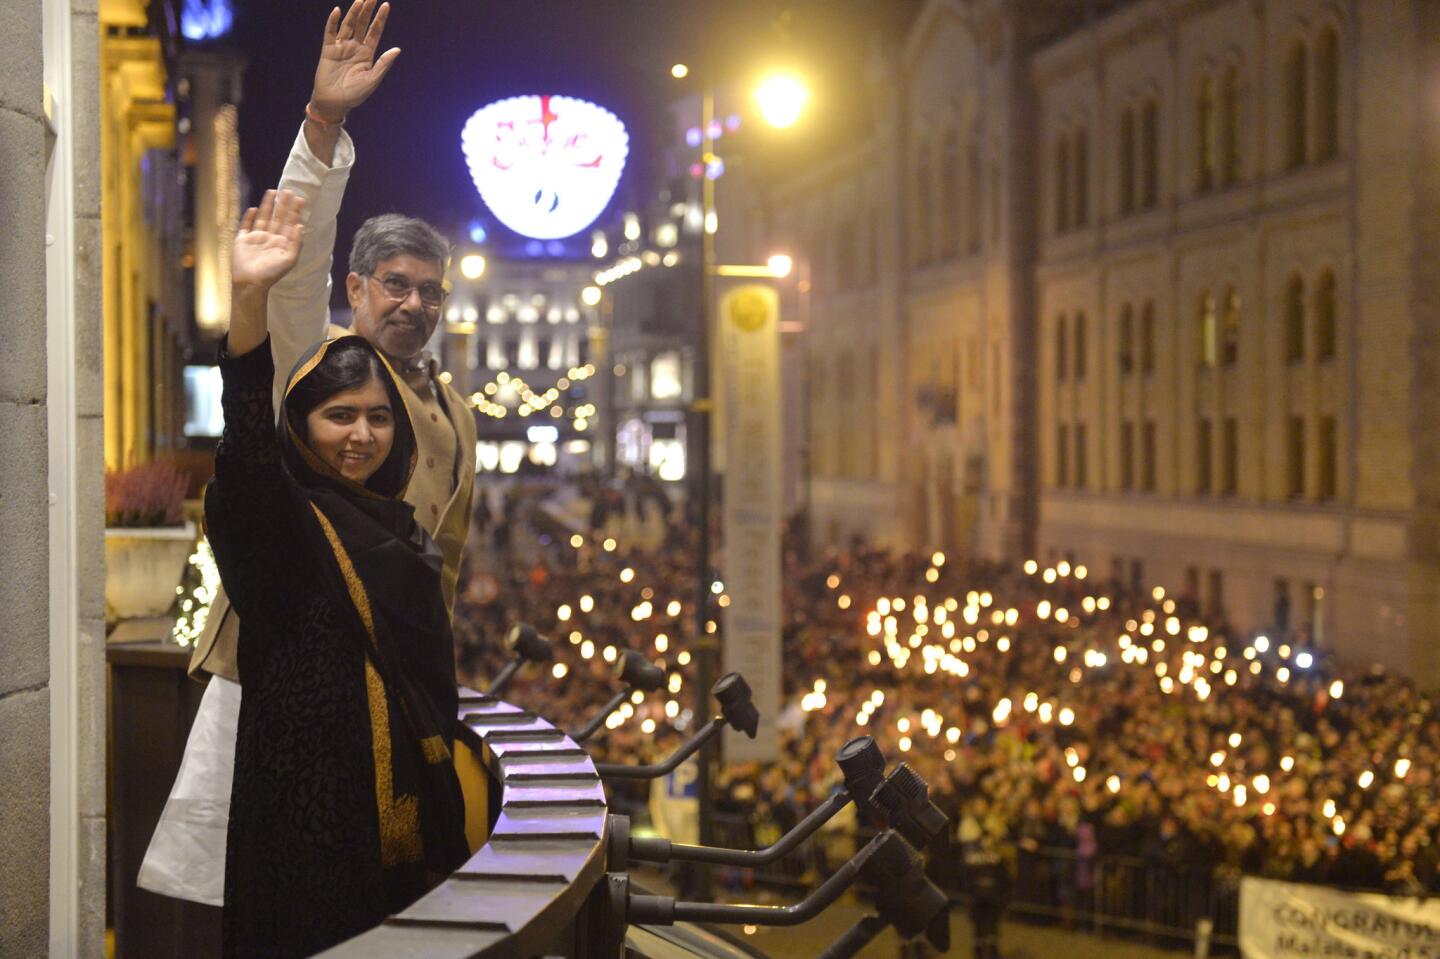 Nobel Peace Prize laureates Malala Yousafzai and Kailash Satyarthi wave from the balcony of Grand Hotel during a torchlight procession in their honor in Oslo, Norway, 2014.